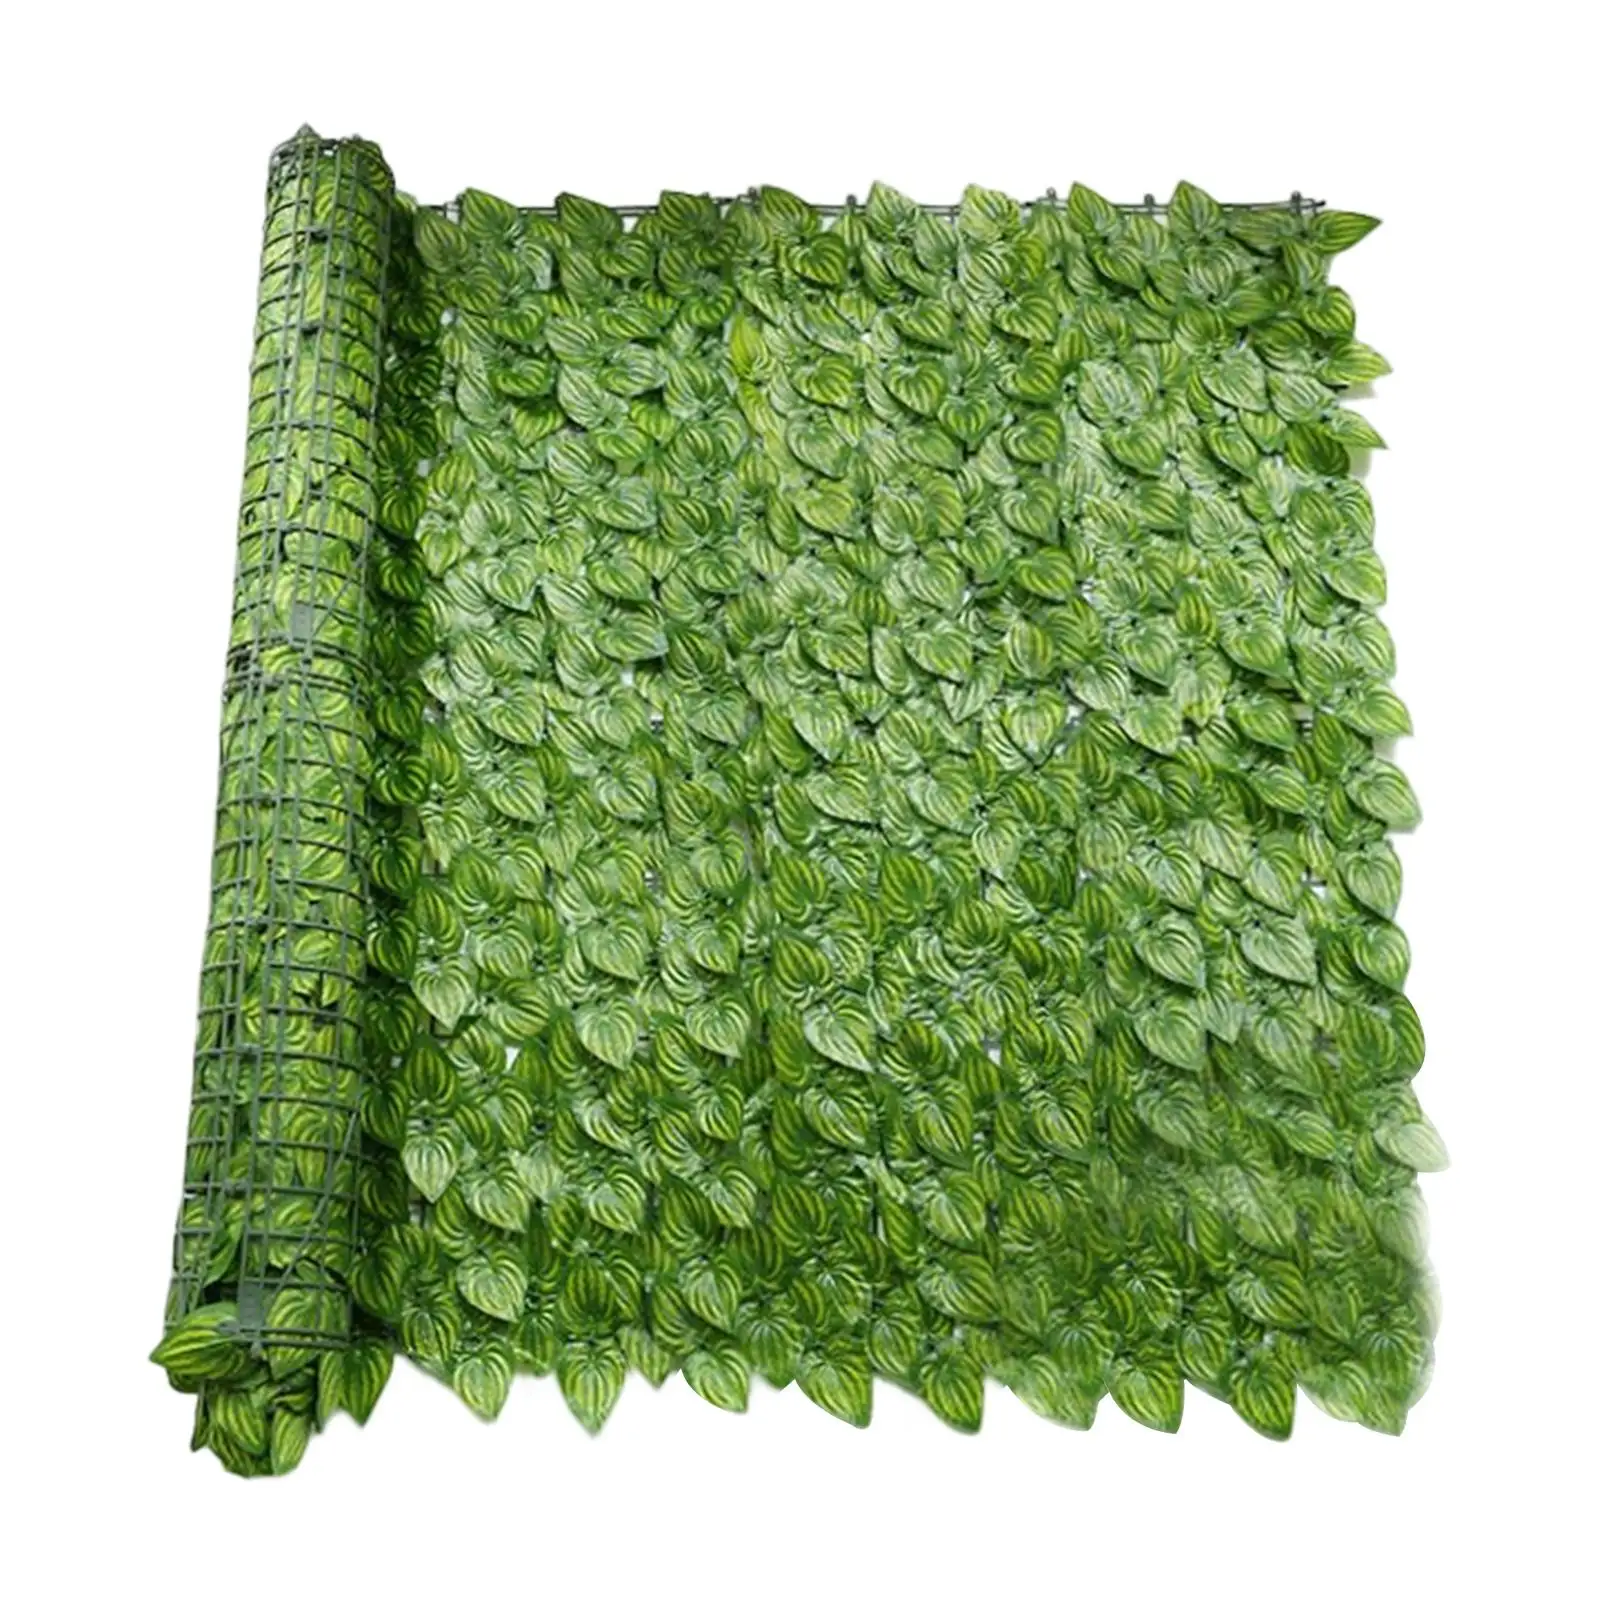 Artificial Faux Leaf Privacy Fence Wall Screen 0.5MX1M Sun protected Ornament Hedges Fence for Home Yard Outdoor Backyard Decor